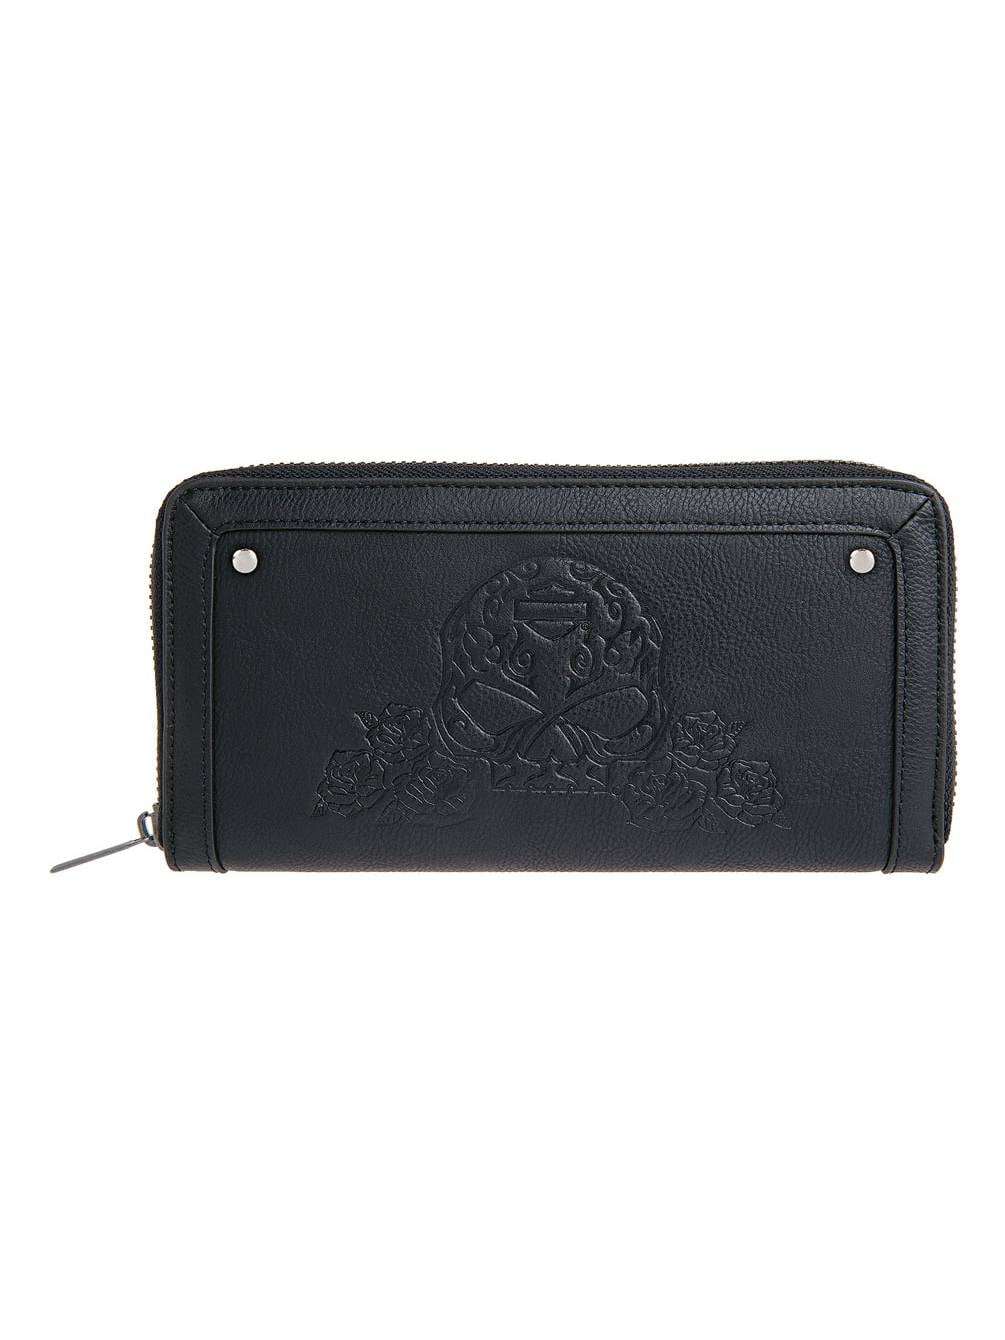 Men's Black Trifold Wallet with Black and White Sugar Skull Print on Front 